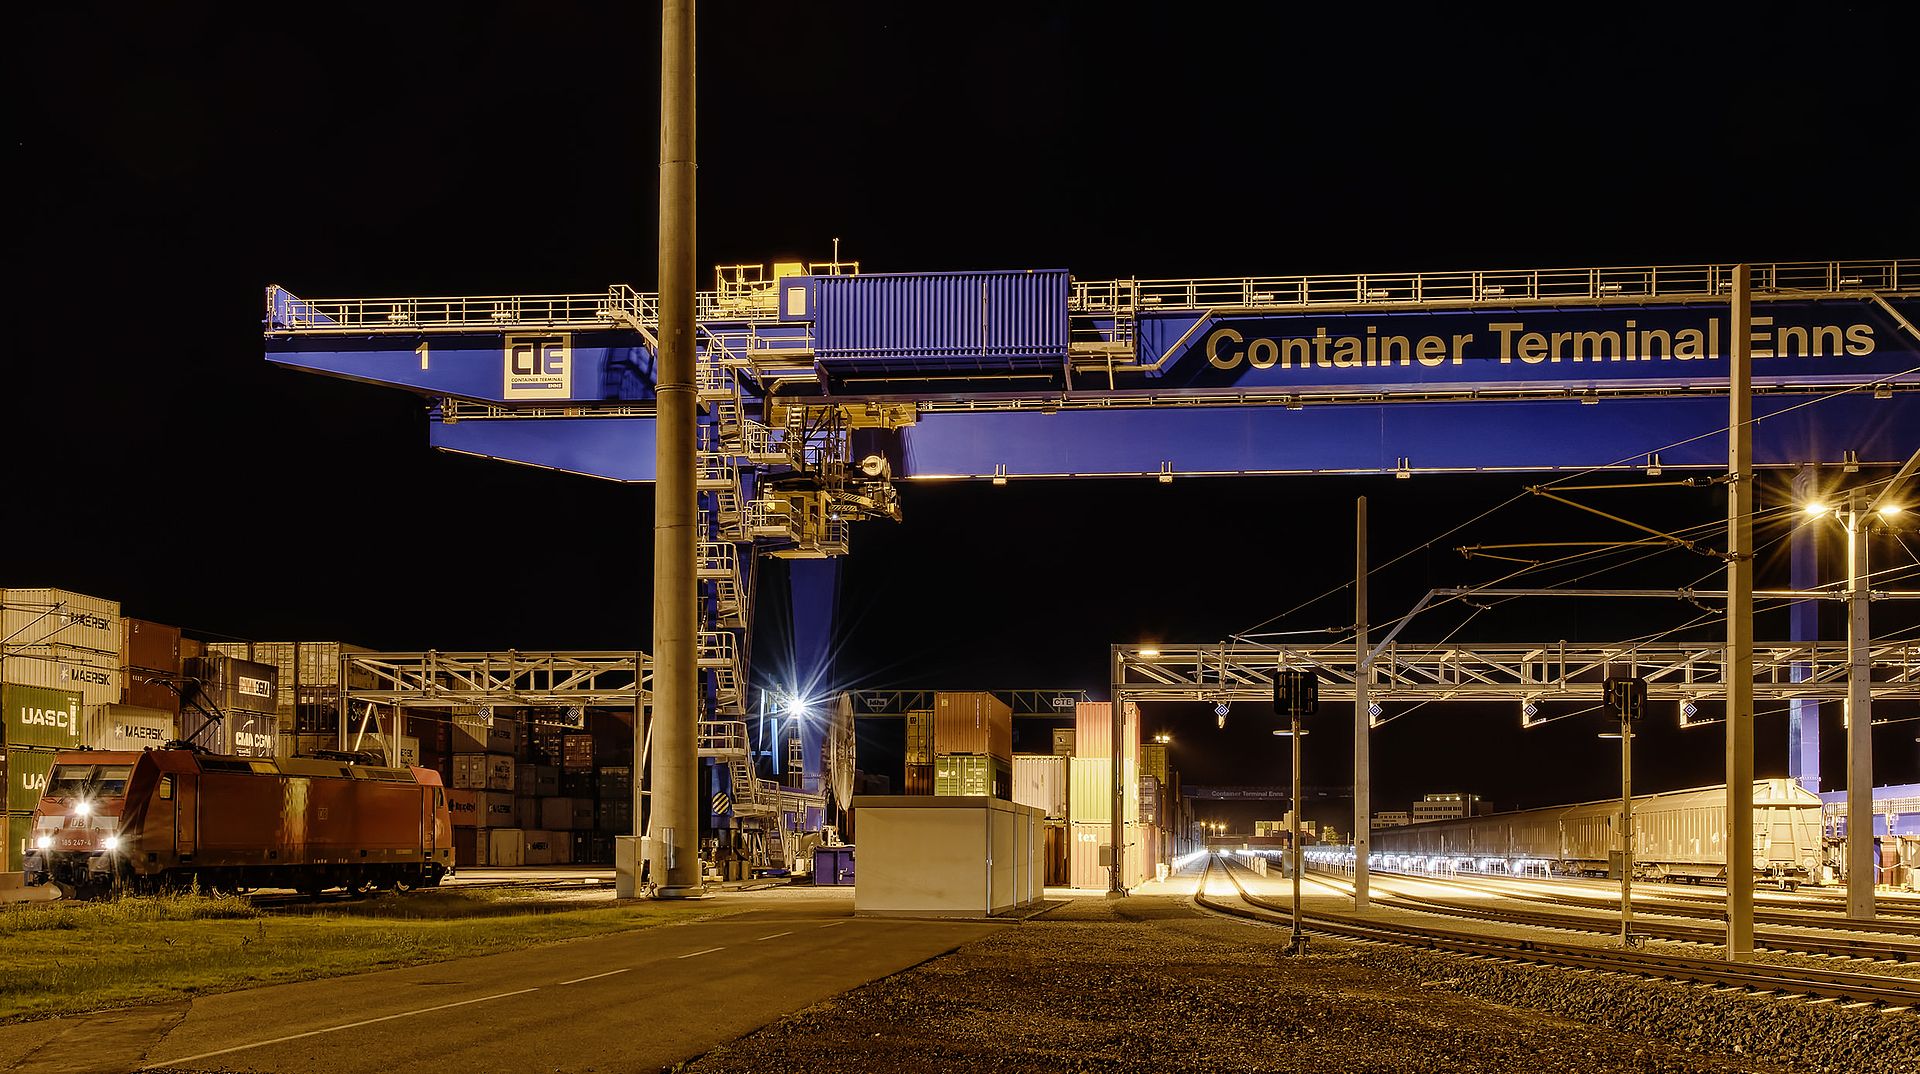 Container Terminal Enns will be expanded for EUR 7 million